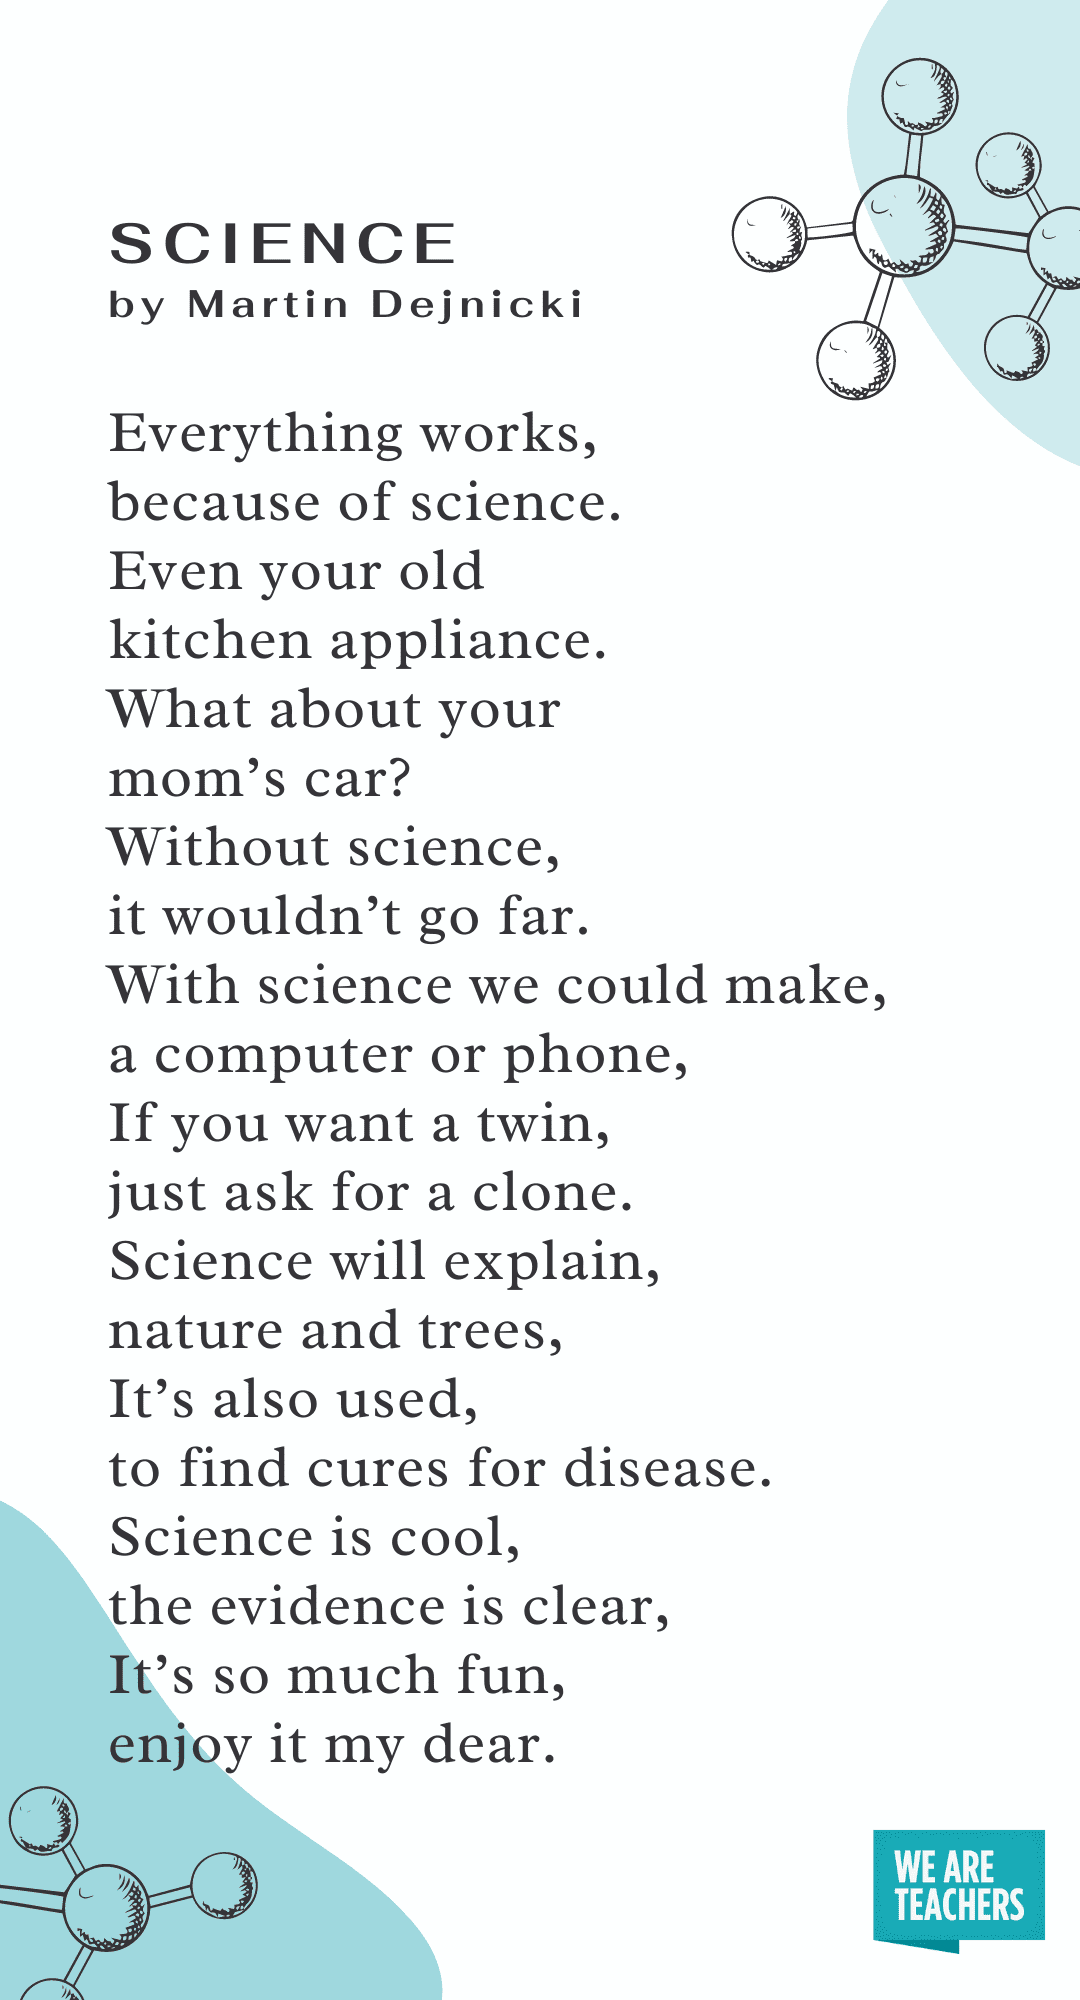 Science by Martin Dejnicki science poem for the classroom